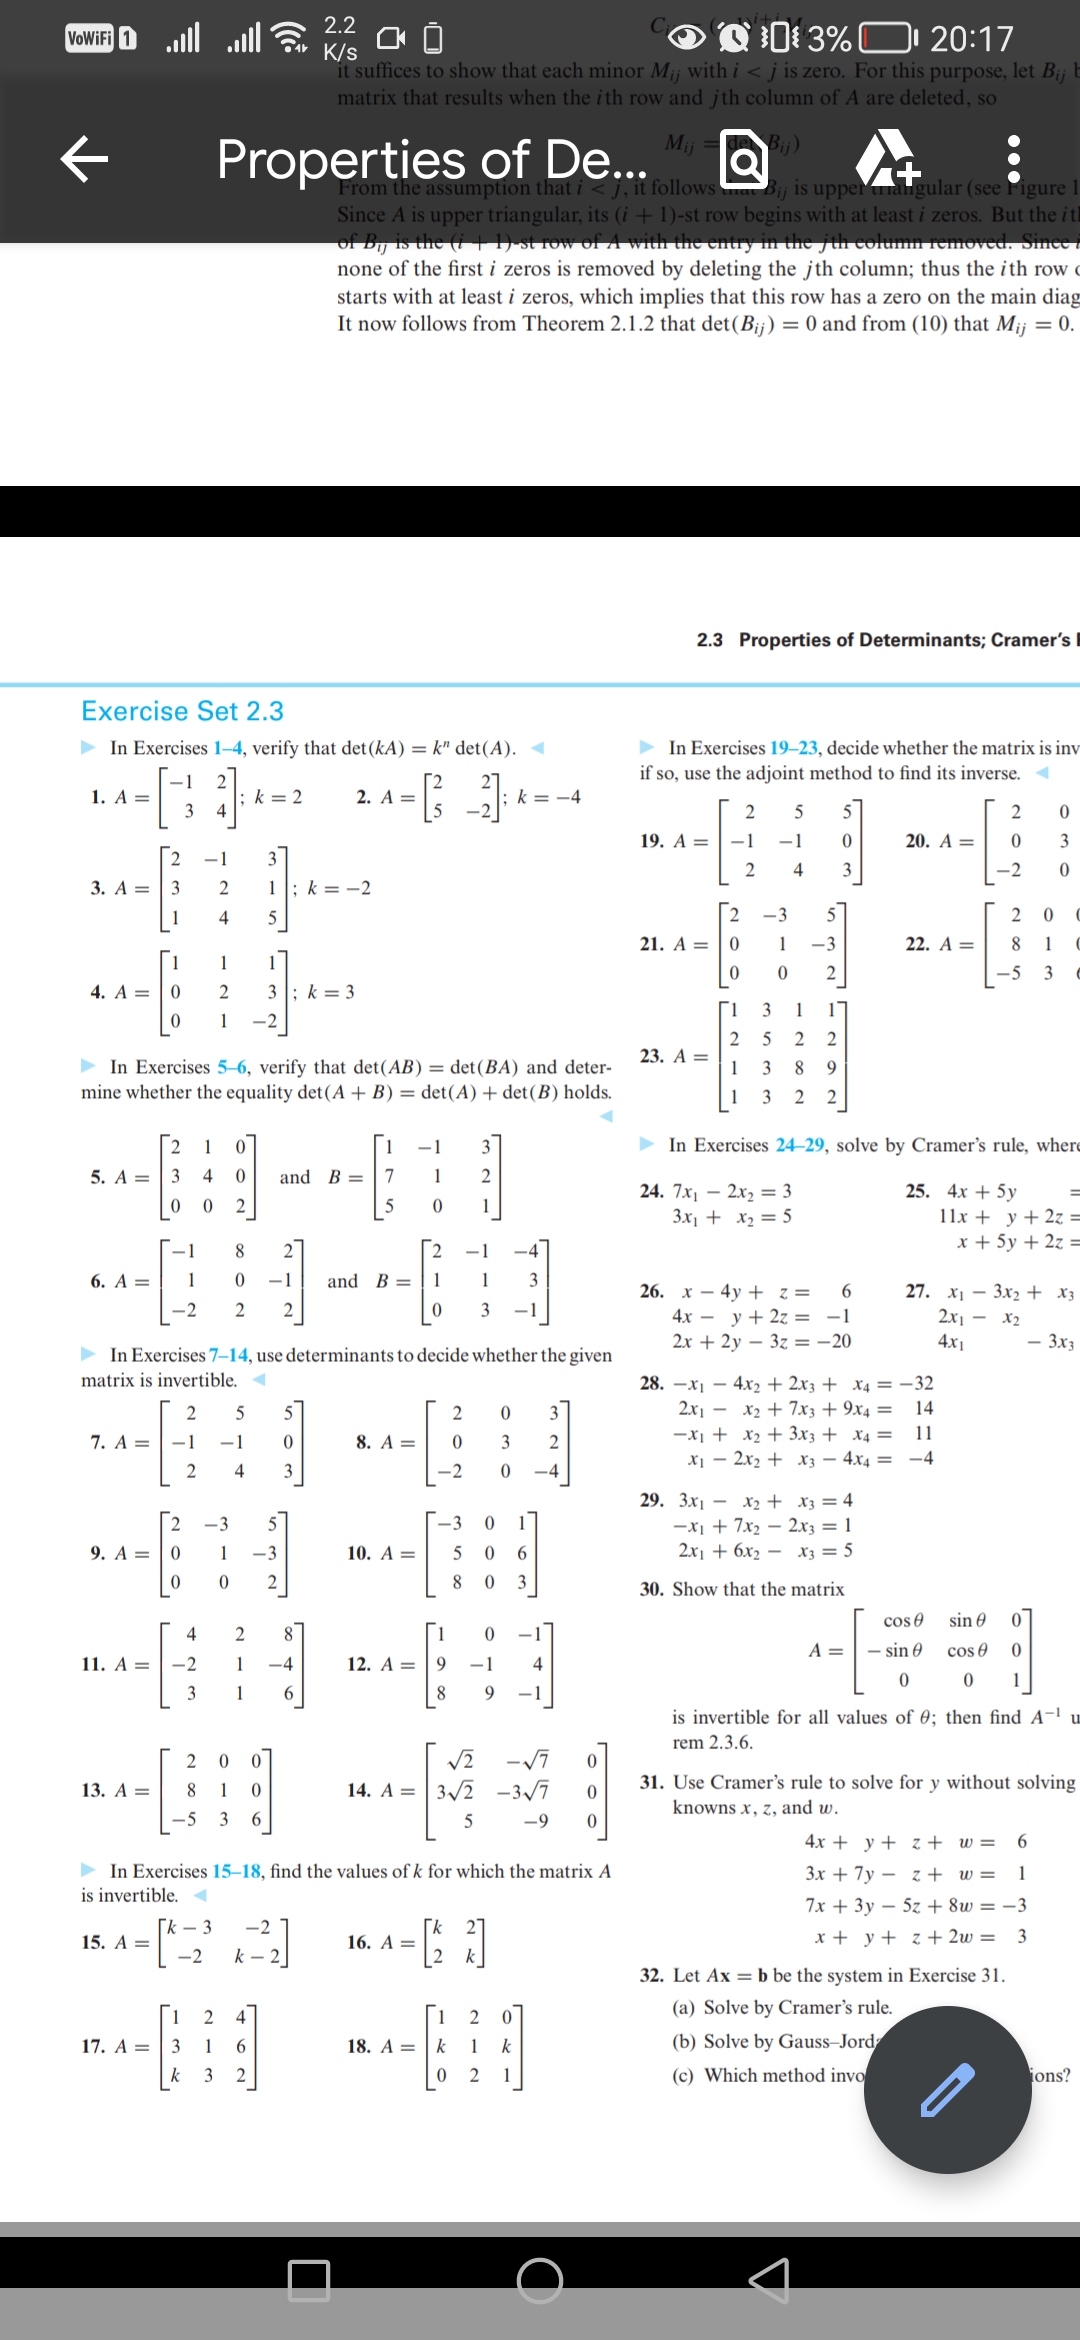 VoWiFi 1
Exercise Set 2.3
► In Exercises 1-4, verify that det (kA) = k" det(A). ◄
1. A =
2. A = [3_-3]; k=
-2
5. A =
1
3
4
2 -1 3
3. A = 3 2 1: k=-2
dit
1 4 5
1 1 1
4. A = 0 2 3 k 3
0
1
6. A =
7. A =
► In Exercises 5-6, verify that det (AB) = det (BA) and deter-
mine whether the equality det(A + B) = det (A) + det (B) holds.
9. A =
11. A =
13. A =
15. A =
Properties of De...
1
-2
17. A =
; k= 2
2 1 0
3 4 0 and B
0 0
2
2
0
0
► In Exercises 7-14, use determinants to decide whether the given
matrix is invertible. <
4
-2
3
2 5
-1 -1
2 4
8 2
0 -1
2 2
2 0
8 1
-5 3
-3
1 -3
0 2
2.2
K/s
00
Q3%
20:17
it suffices to show that each minor Mi¡ with i < j is zero. For this purpose, let B¡¡ b
matrix that results when the ith row and jth column of A are deleted, so
2
1
1
0
6
Mij
Q
From the assumption that i <j, it follows Bij is upper angular (see Figure 1
Since A is upper triangular, its (i + 1)-st row begins with at least i zeros. But the it
of Dij is the (i | 1) st row of A with the entry in the jth column removed. Sinee
none of the first i zeros is removed by deleting the jth column; thus the ith row
starts with at least i zeros, which implies that this row has a zero on the main diag
It now follows from Theorem 2.1.2 that det (Bij) = 0 and from (10) that Mij = 0.
1
2
4
3 1 6
k 3 2
0
3
-4
[k - 3 -2
-2 k-2
1 -1 3
7
1
2
5
0
and B =
8. A =
10. A =
12. A =
0
16. A =
NON
18. A =
0 3
0 3 2
-2 0 -4
-3 0
►In Exercises 15-18, find the values of k for which the matrix A
is invertible. ◄
0 6
5
8 0 3
√2 -√7
14. A = 3√2-3√7
5
-4
1
0
9 -1 4
9
1
2
k
1
k
0 2 1
0
0
-9 0
2.3 Properties of Determinants; Cramer's
► In Exercises 19-23, decide whether the matrix is inv
if so, use the adjoint method to find its inverse.
19. A =
21. A =
23. A =
Bij)
28.
-1
2
0
0
2 5 5
-1
0
2 4
3
-3
1
0
1
2
1
3
2
5
1
3
1 3 22
5
-3
2
1
2
26. x 4y + z =
8 9
NGON
6
-1
4x = y + 2z =
2x + 2y3z = -20
20. A =
29. 3x₁ - x₂ + x3 = 4
-x₁ +7x₂2x3 = 1
2x₁ + 6x₂x3 = 5
30. Show that the matrix
22. A =
A =
► In Exercises 24-29, solve by Cramer's rule, where
24. 7x₁2x₂ = 3
25. 4x + 5y
3x₁ + x₂ = 5
x₁4x₂ + 2x3 + x4 = -32
2x₁x₂7x3 + 9x4 = 14
11
-x₁ + x₂ + 3x3 + x4 =
x₁2x₂ + x3 4x4 =
-4
2
0
-2
cos
- sin 0
0
2
0
8 1
3
-5
sin 0
cos
0
27. x₁3x2 + x3
2x1x₂
4x1
0
3
0
11x + y + 2z =
x + 5y + 2z =
0
C
C
32. Let Ax=b be the system in Exercise 31.
(a) Solve by Cramer's rule.
(b) Solve by Gauss-Jord
(c) Which method invo
=
4x+y+z+ w= 6
3x + 7yz + w= 1
7x + 3y5z +8w=-3
x + y + z + 2w= 3
- 3x3
1
is invertible for all values of 0; then find A-¹ u
rem 2.3.6.
31. Use Cramer's rule to solve for y without solving
knowns x, z, and w.
ions?